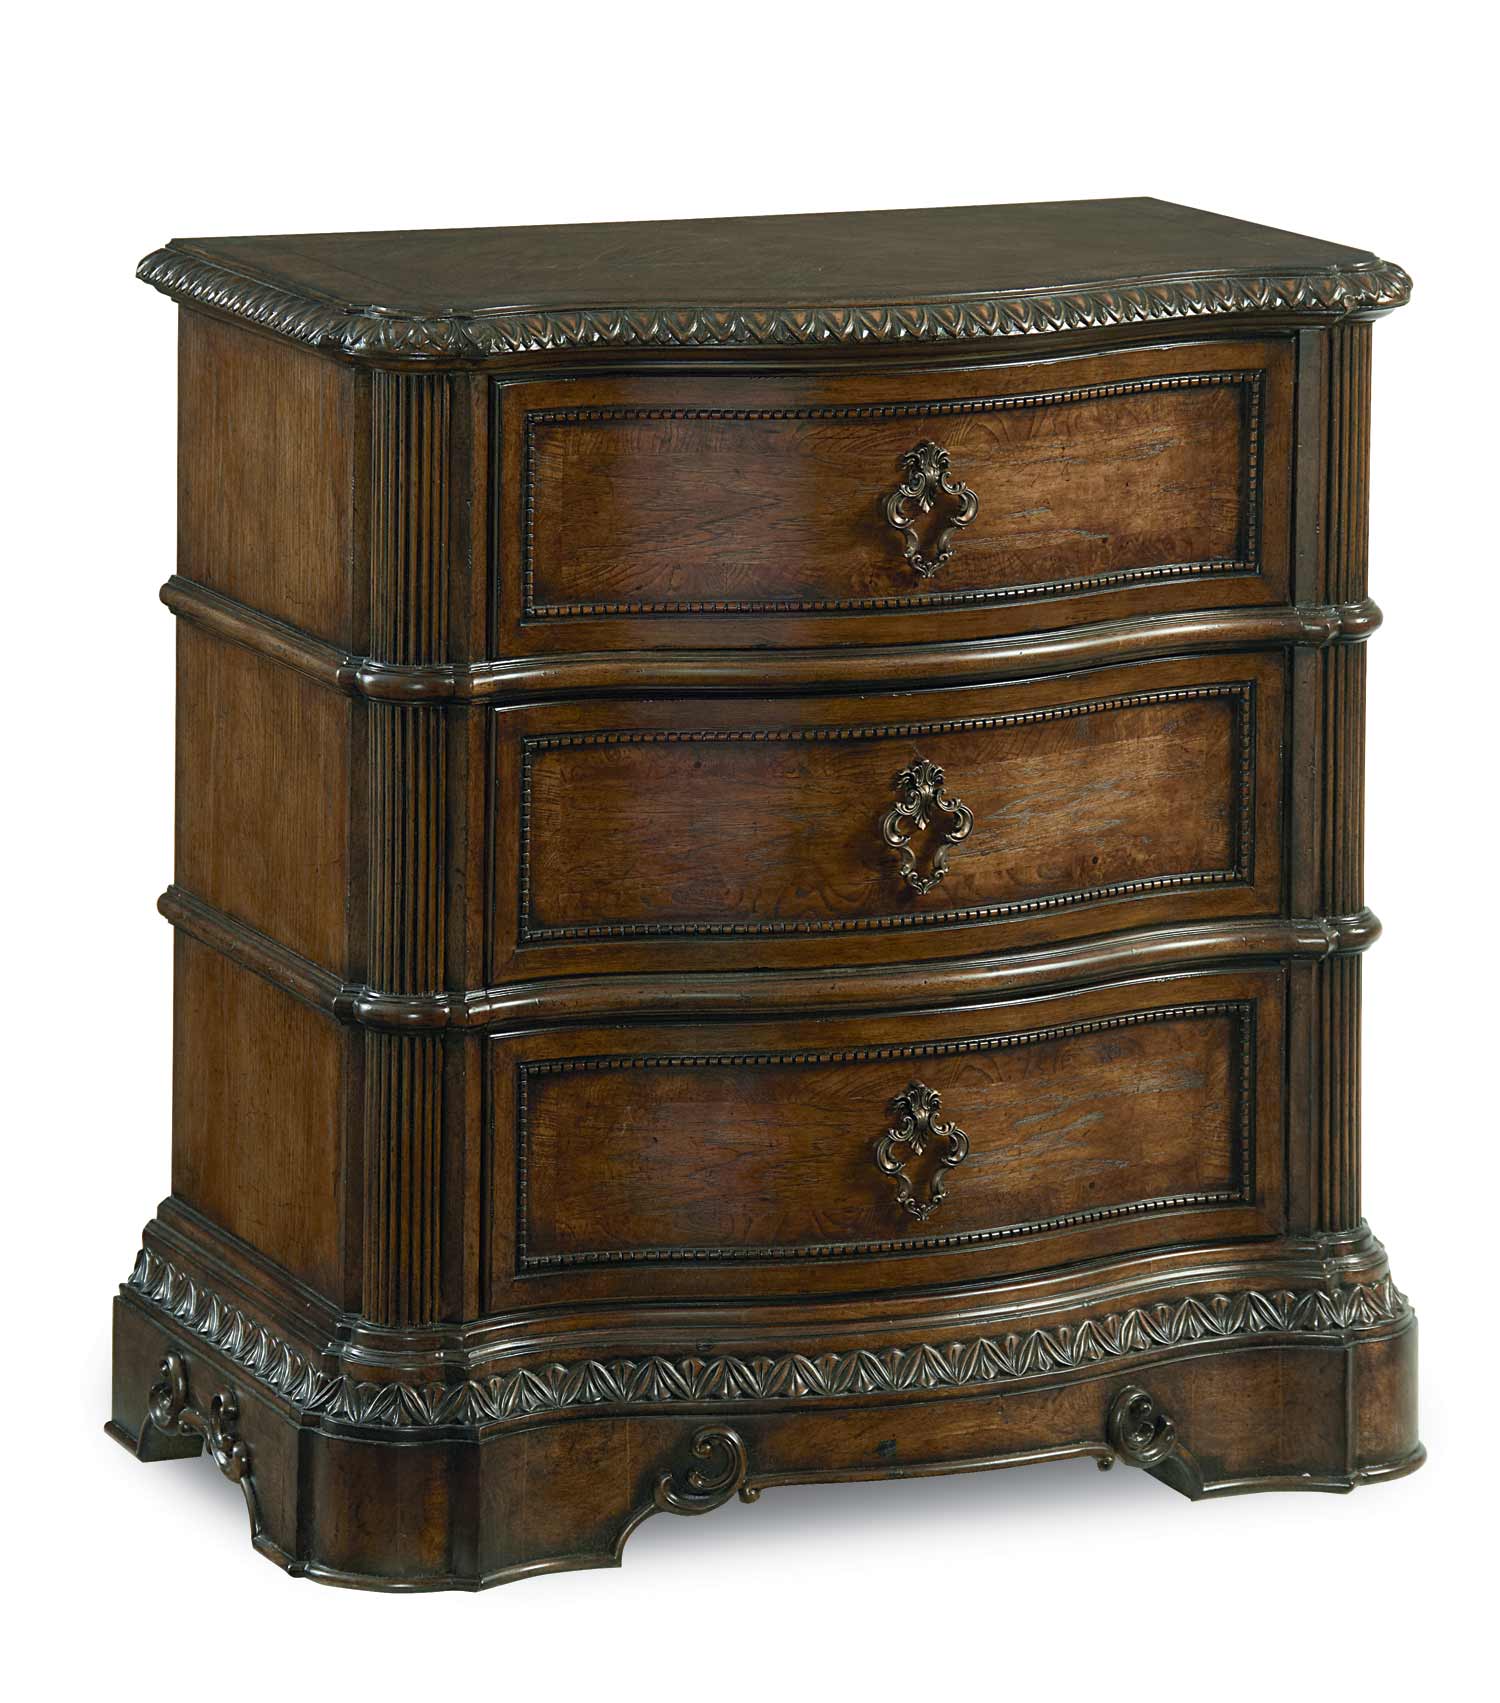 Legacy Classic Pemberleigh Night Stand - Brandy/Burnished Edges